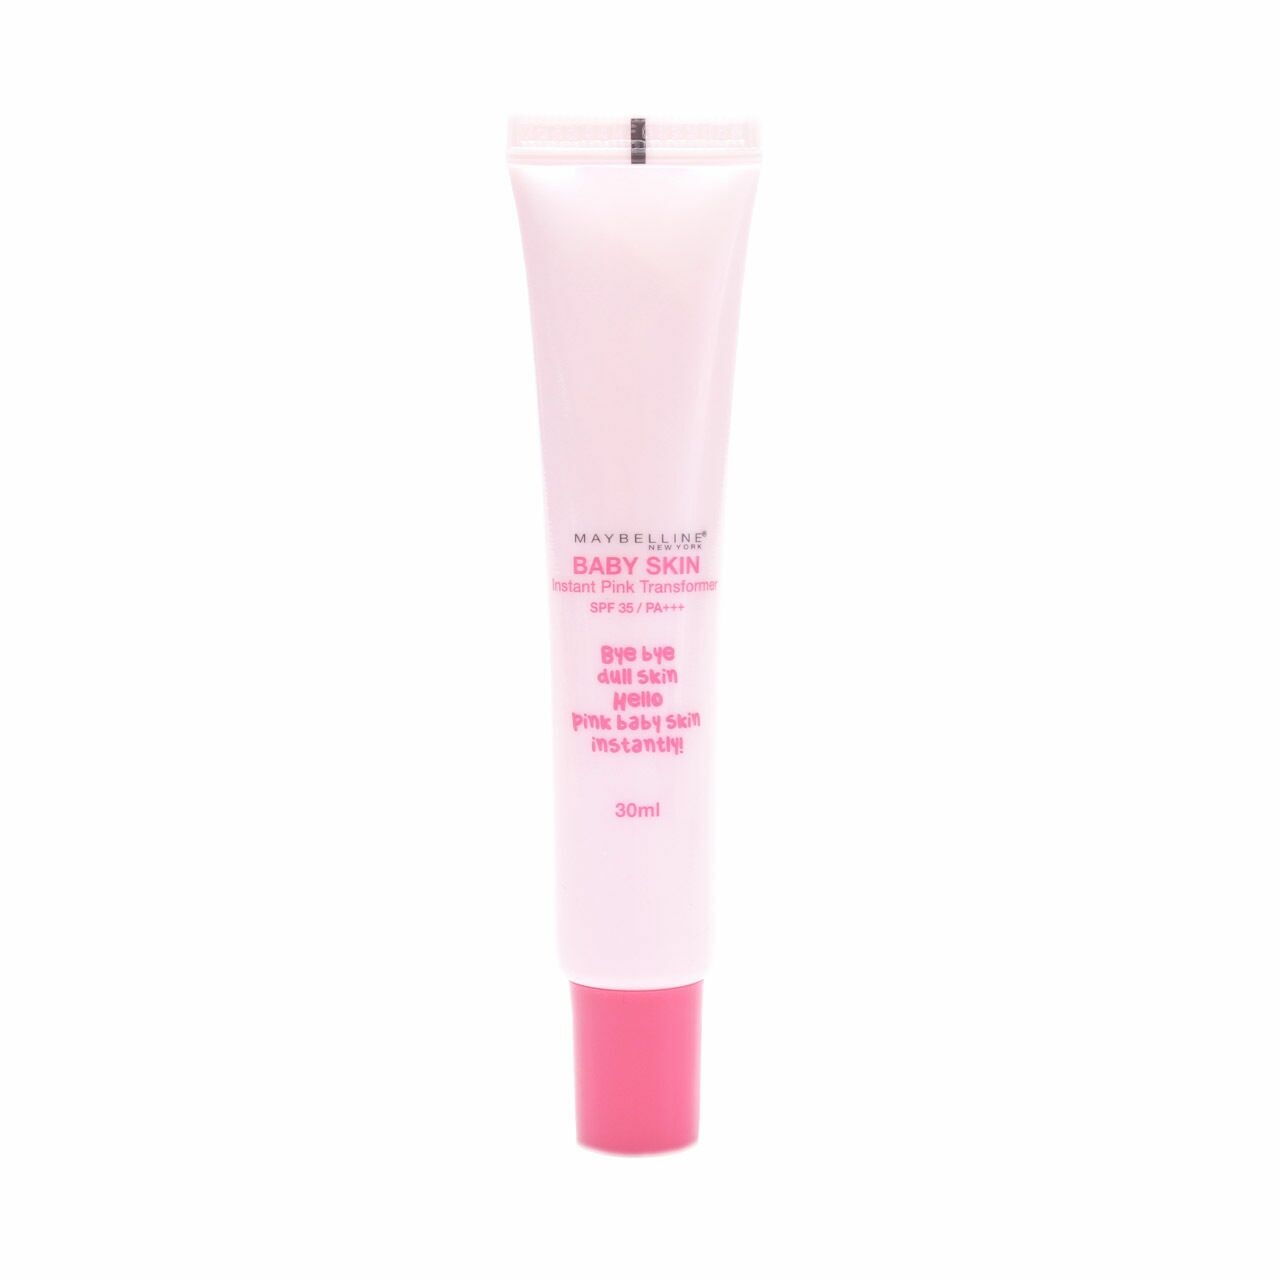 Maybelline Baby Skin Instant Pink Transformer SPF 35 / PA+++ Faces